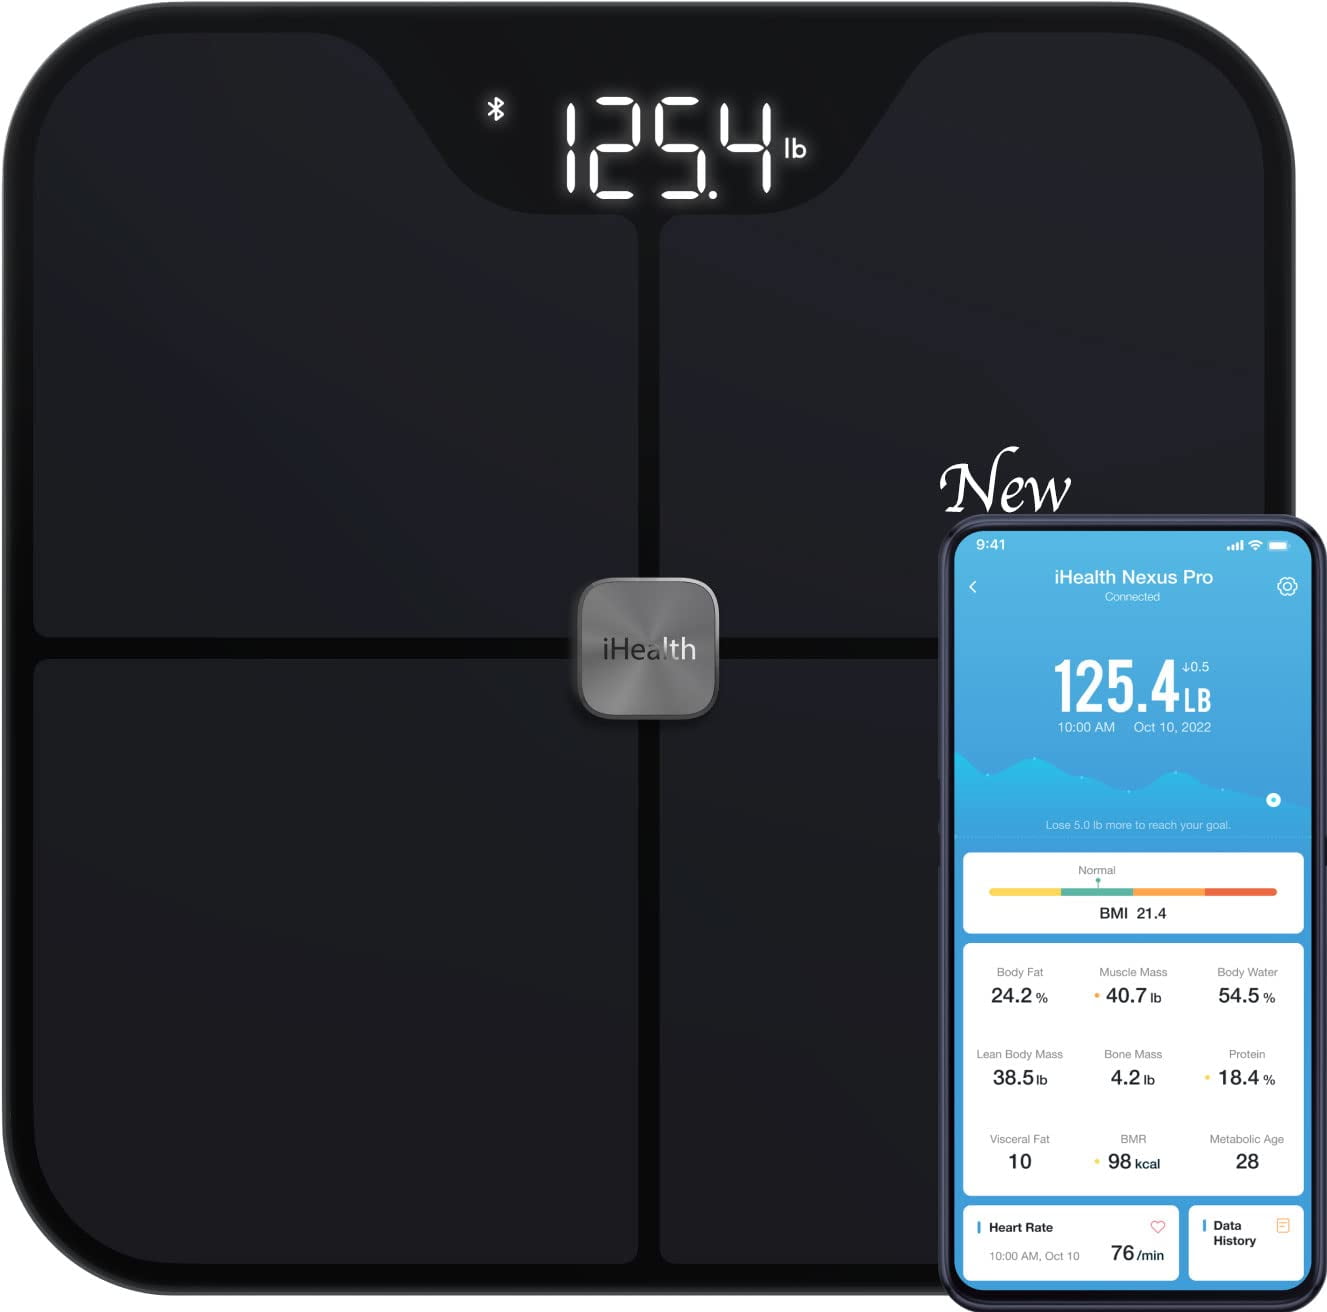 Smart WiFi Scale for Body Weight, FSA HSA Store Approved, Compatible with  Apple Health Scales Electronic Weight Scale - AliExpress